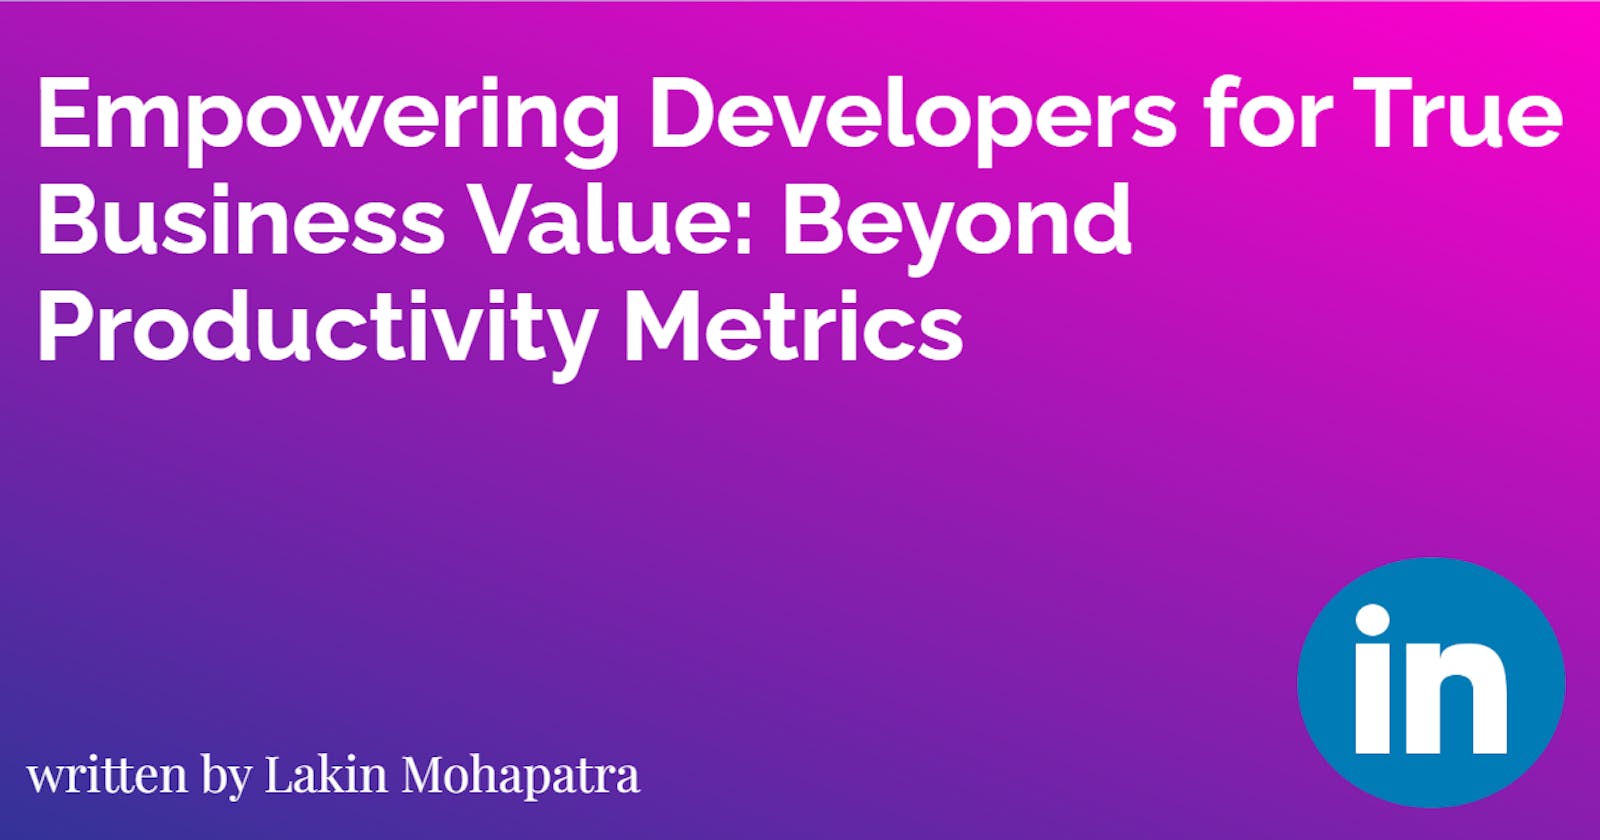 Empowering Developers for True Business Value: Beyond Productivity Metrics